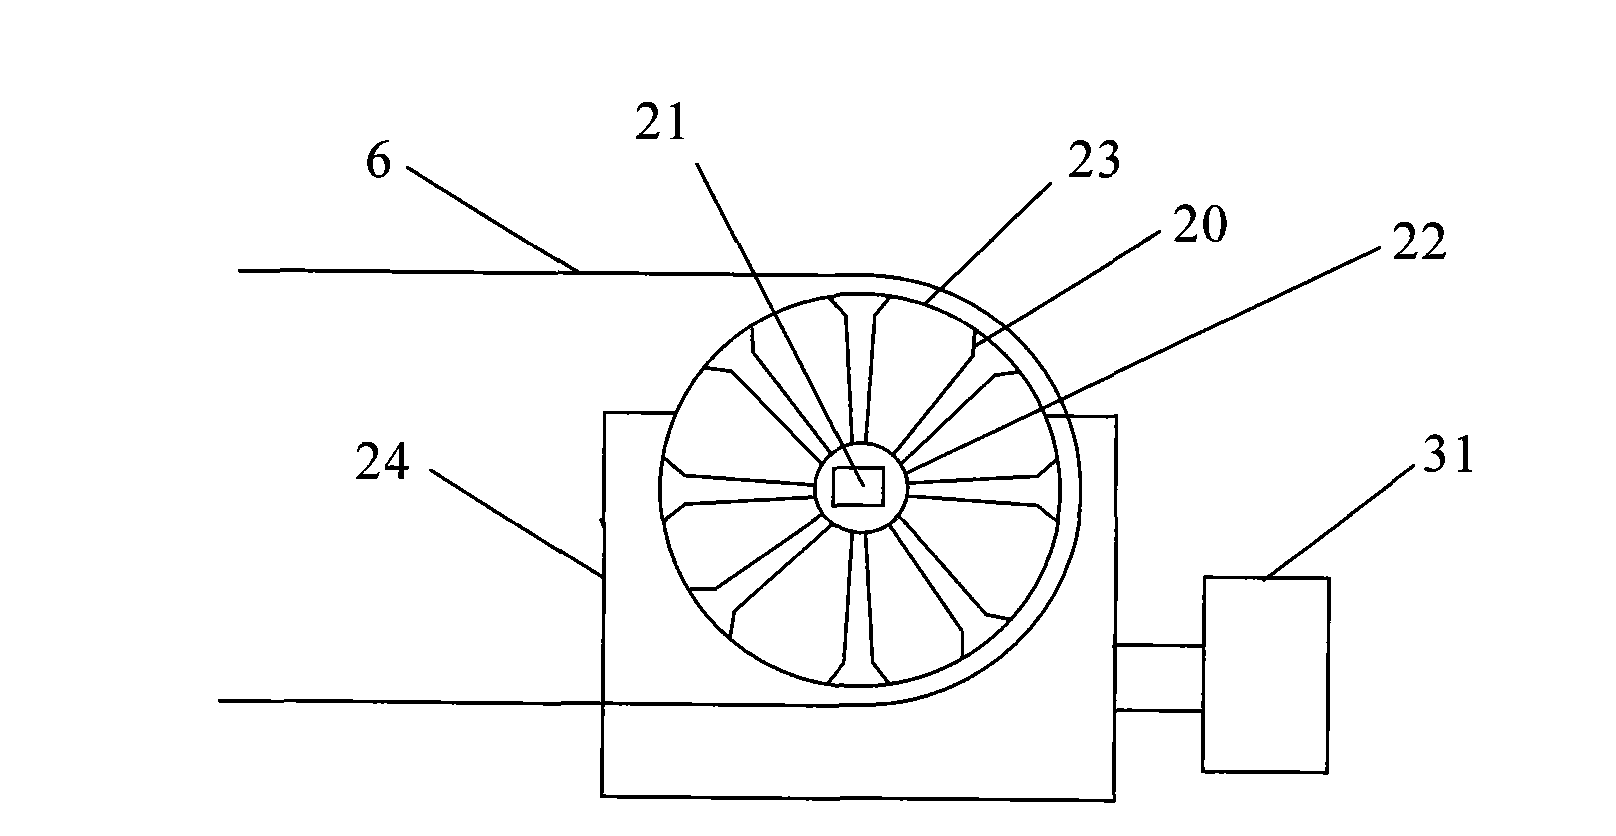 Double revolving and multilayer stacking device for connecting paper by wires